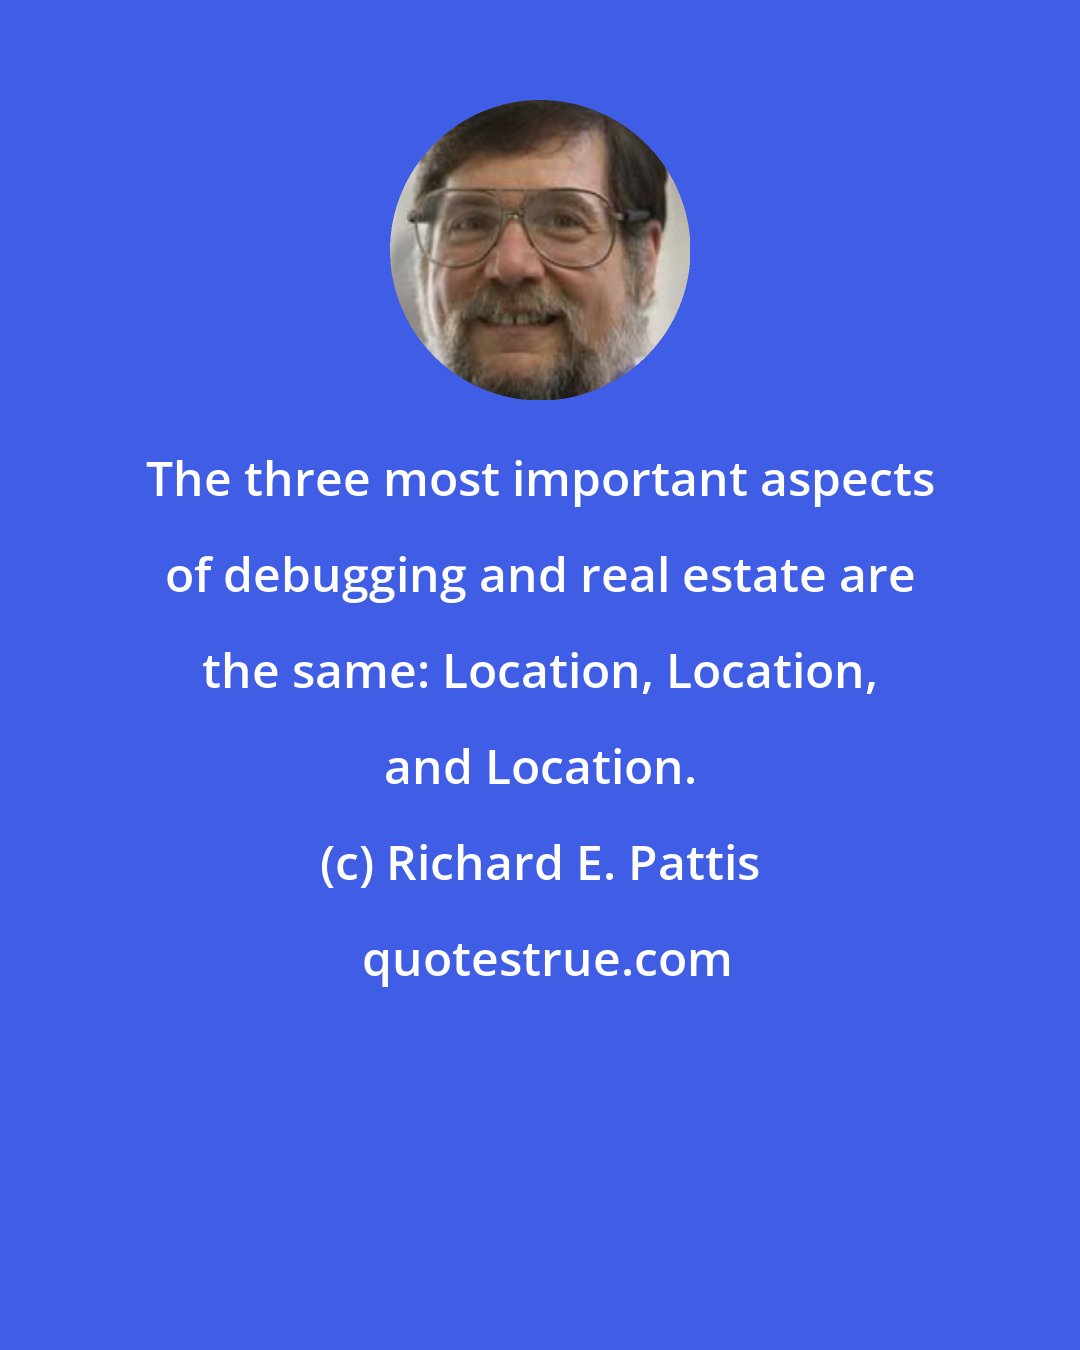 Richard E. Pattis: The three most important aspects of debugging and real estate are the same: Location, Location, and Location.